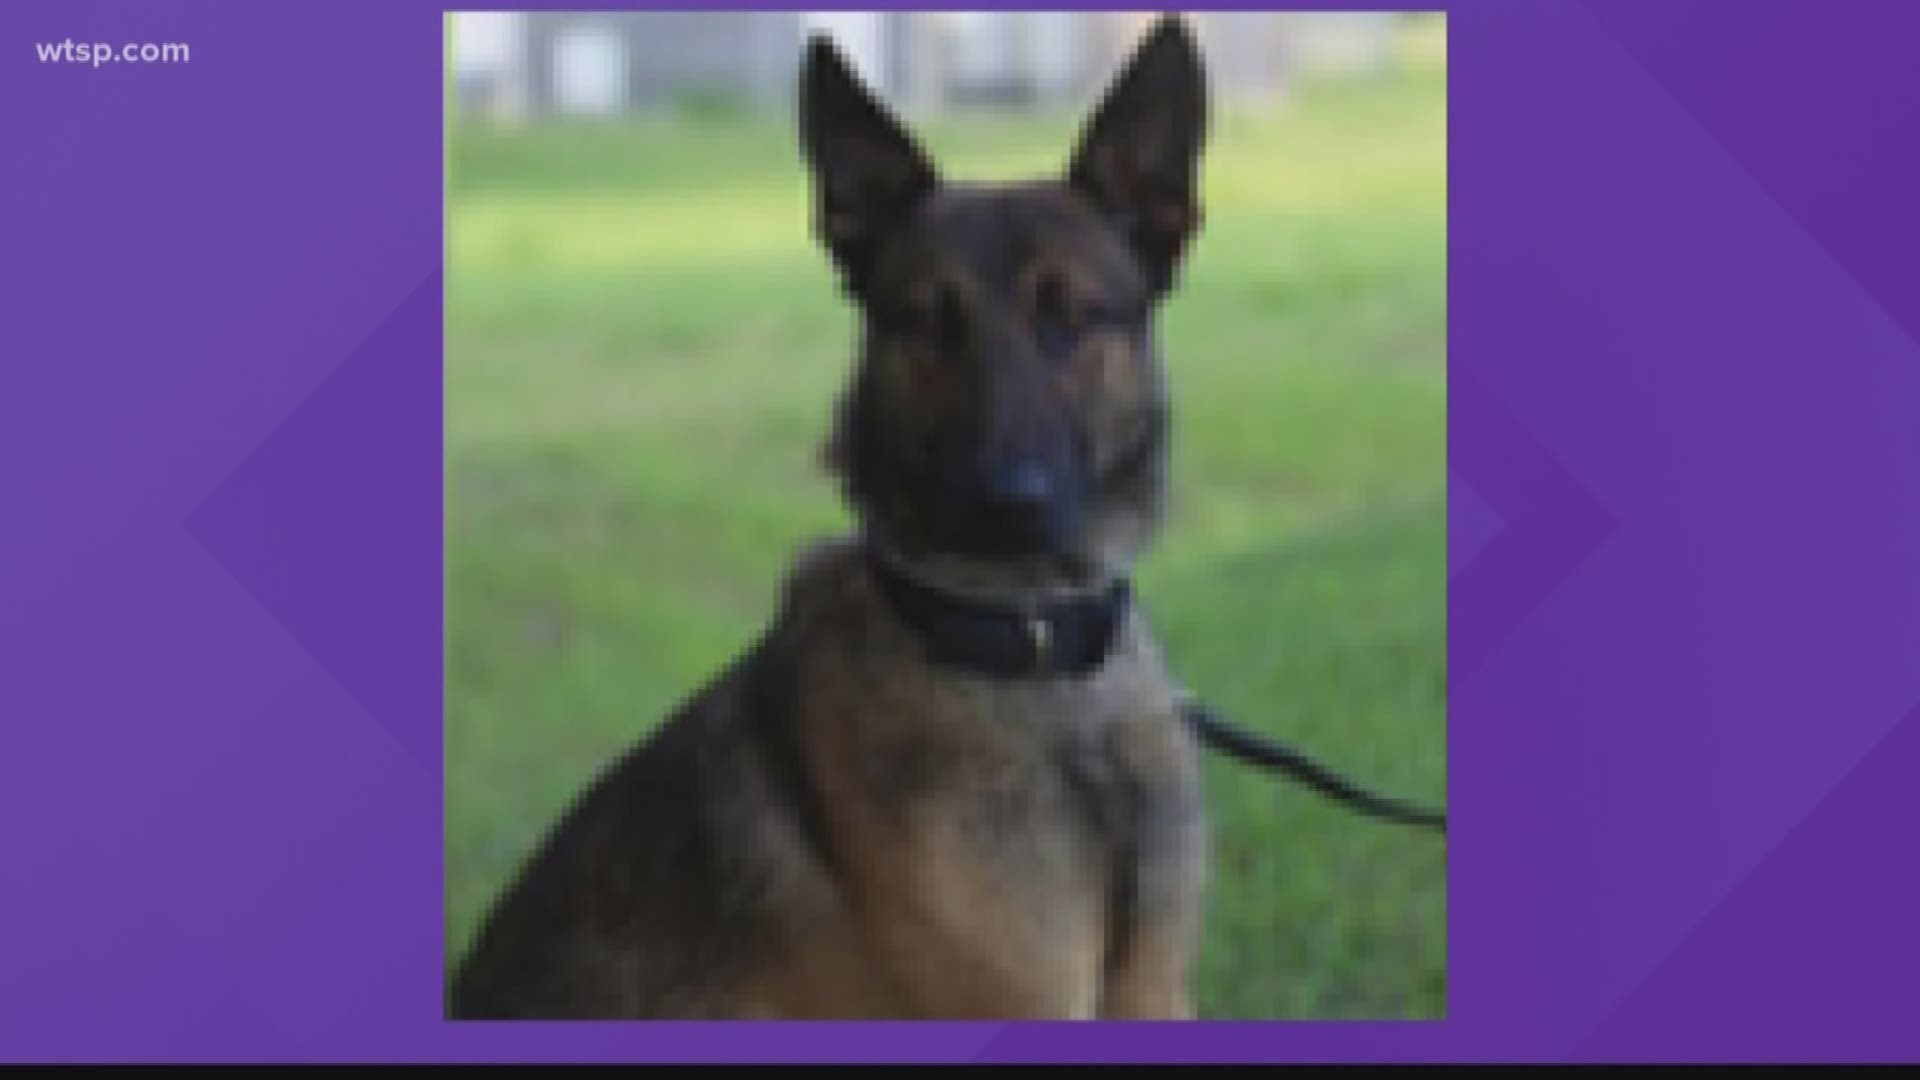 A Polk County deputy was forced to fatally shoot another deputy's K-9 after the dog clamped down on his hand and wouldn't let go Monday night, according to law enforcement.